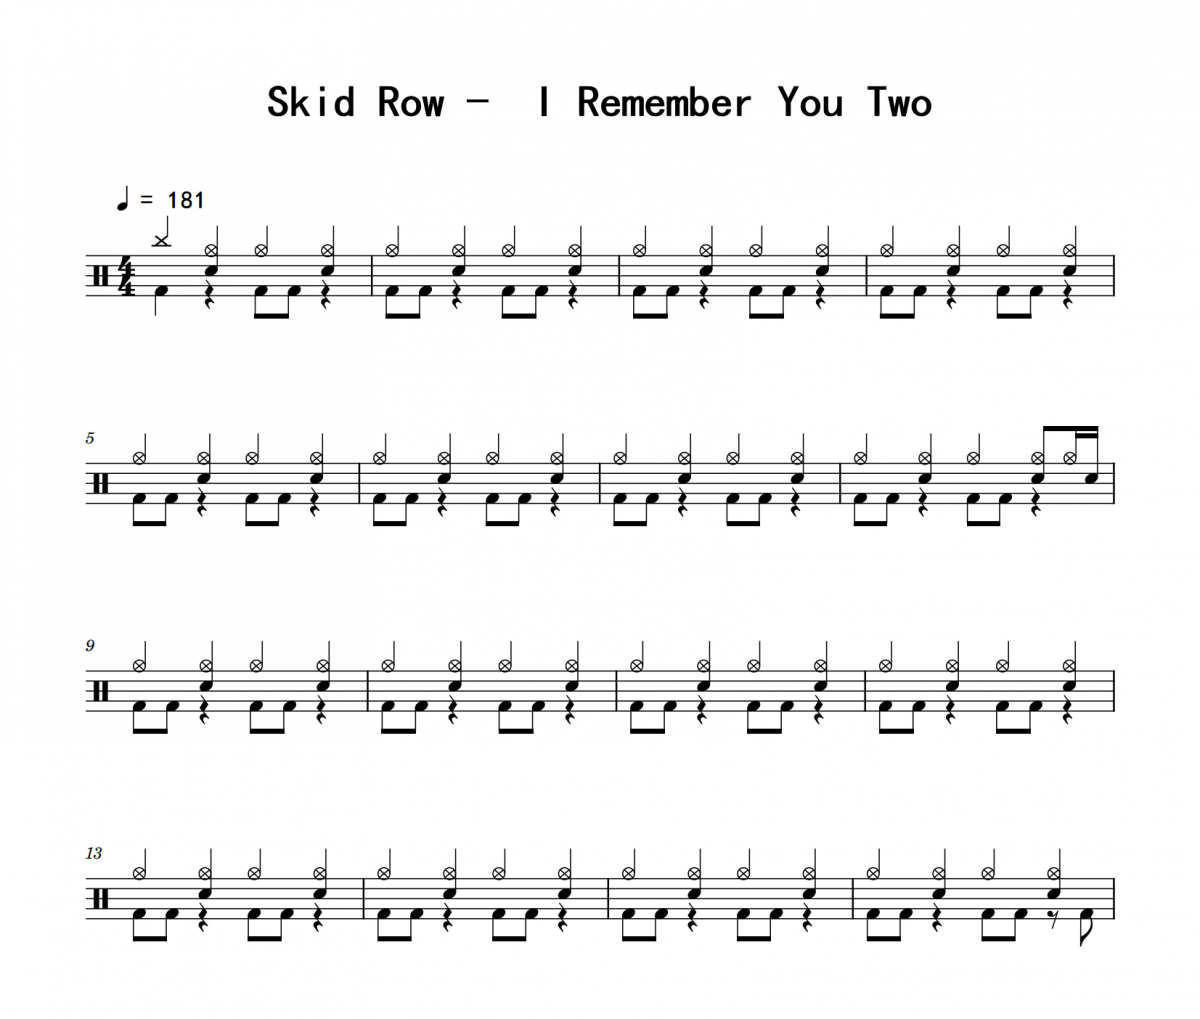 I Remember You Two鼓谱 Skid Row《I Remember You Two》架子鼓|爵士鼓|鼓谱